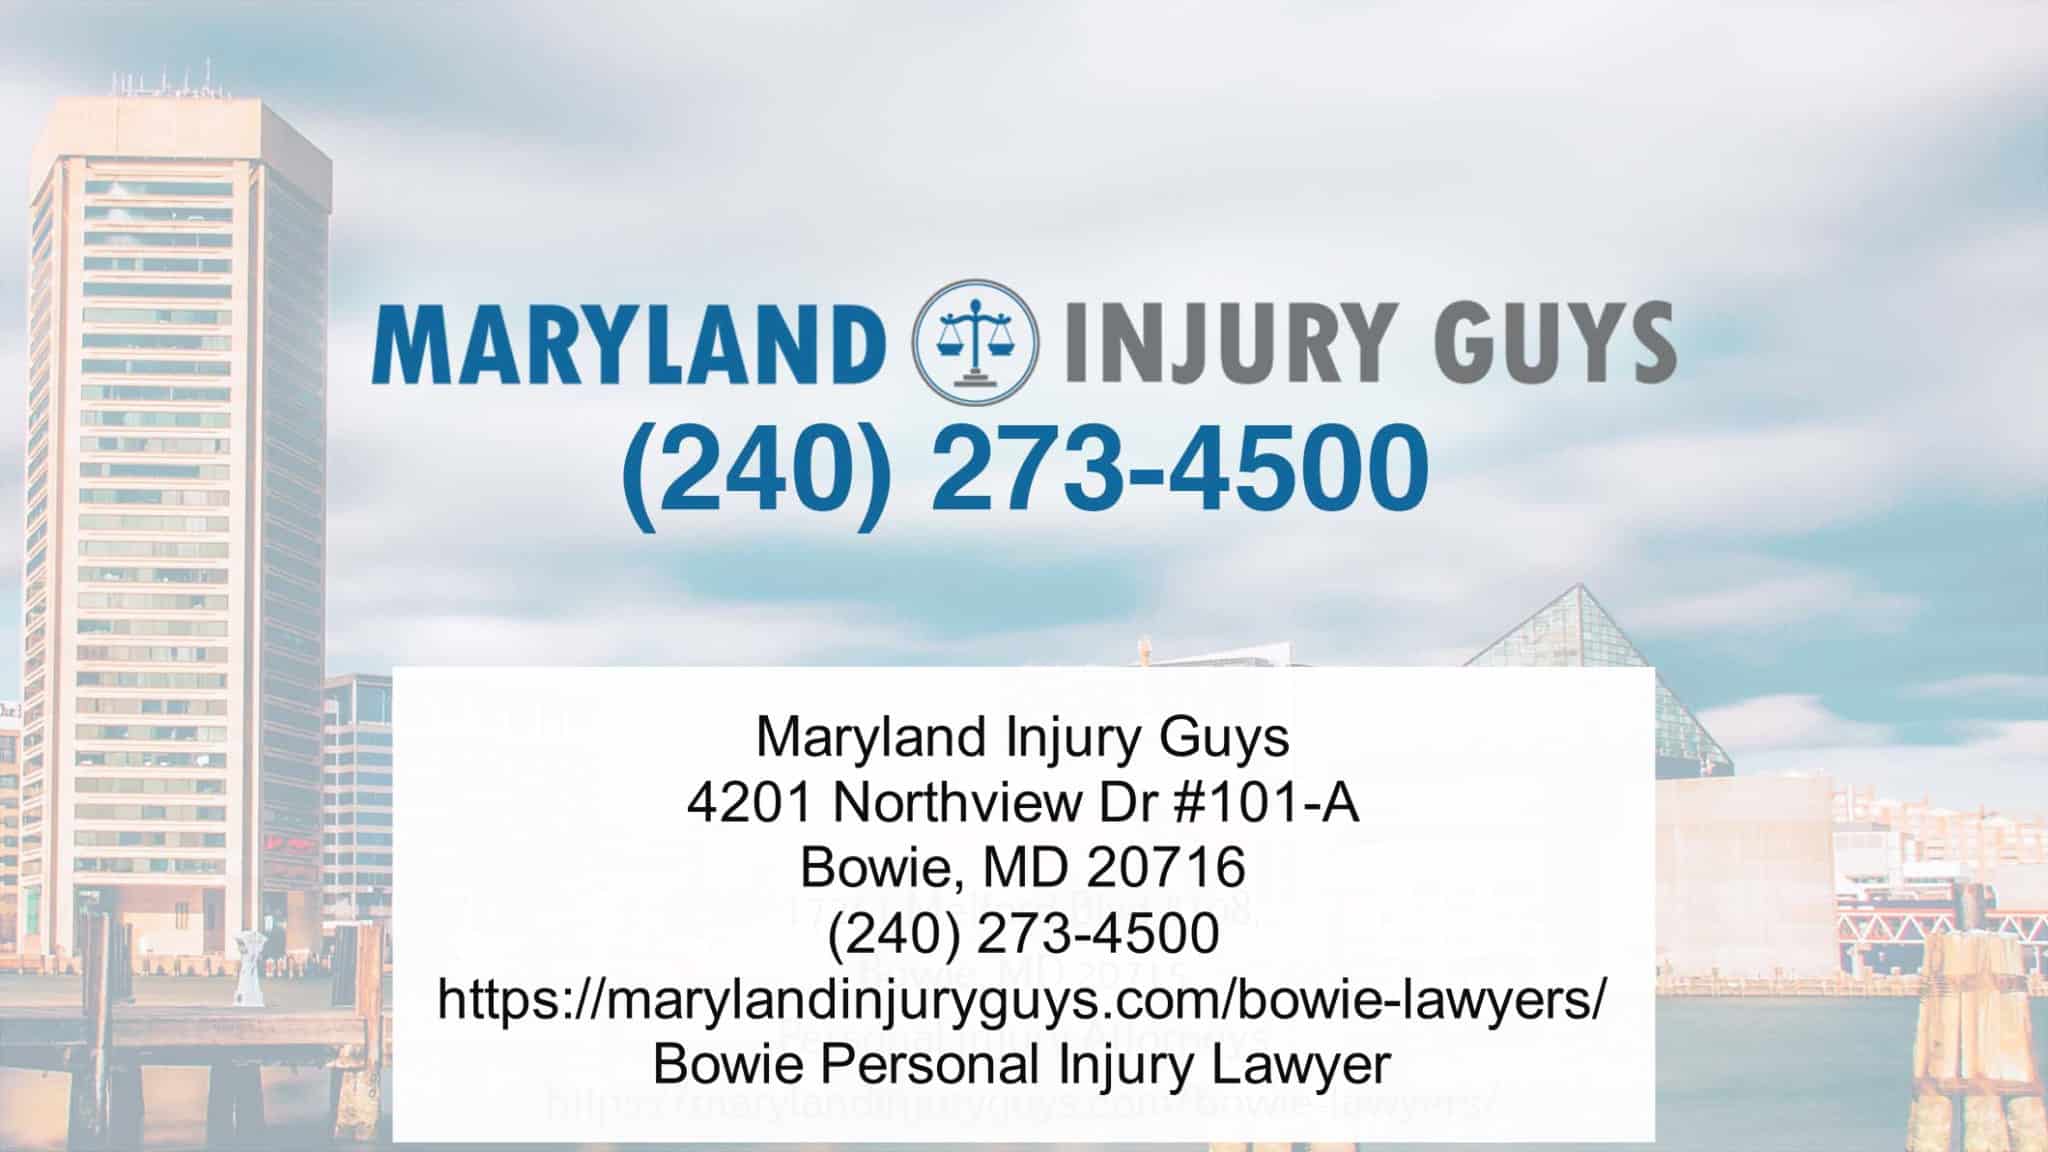 Bowie, MD Personal Injury Attorneys Help Car & Traffic Accident Victims